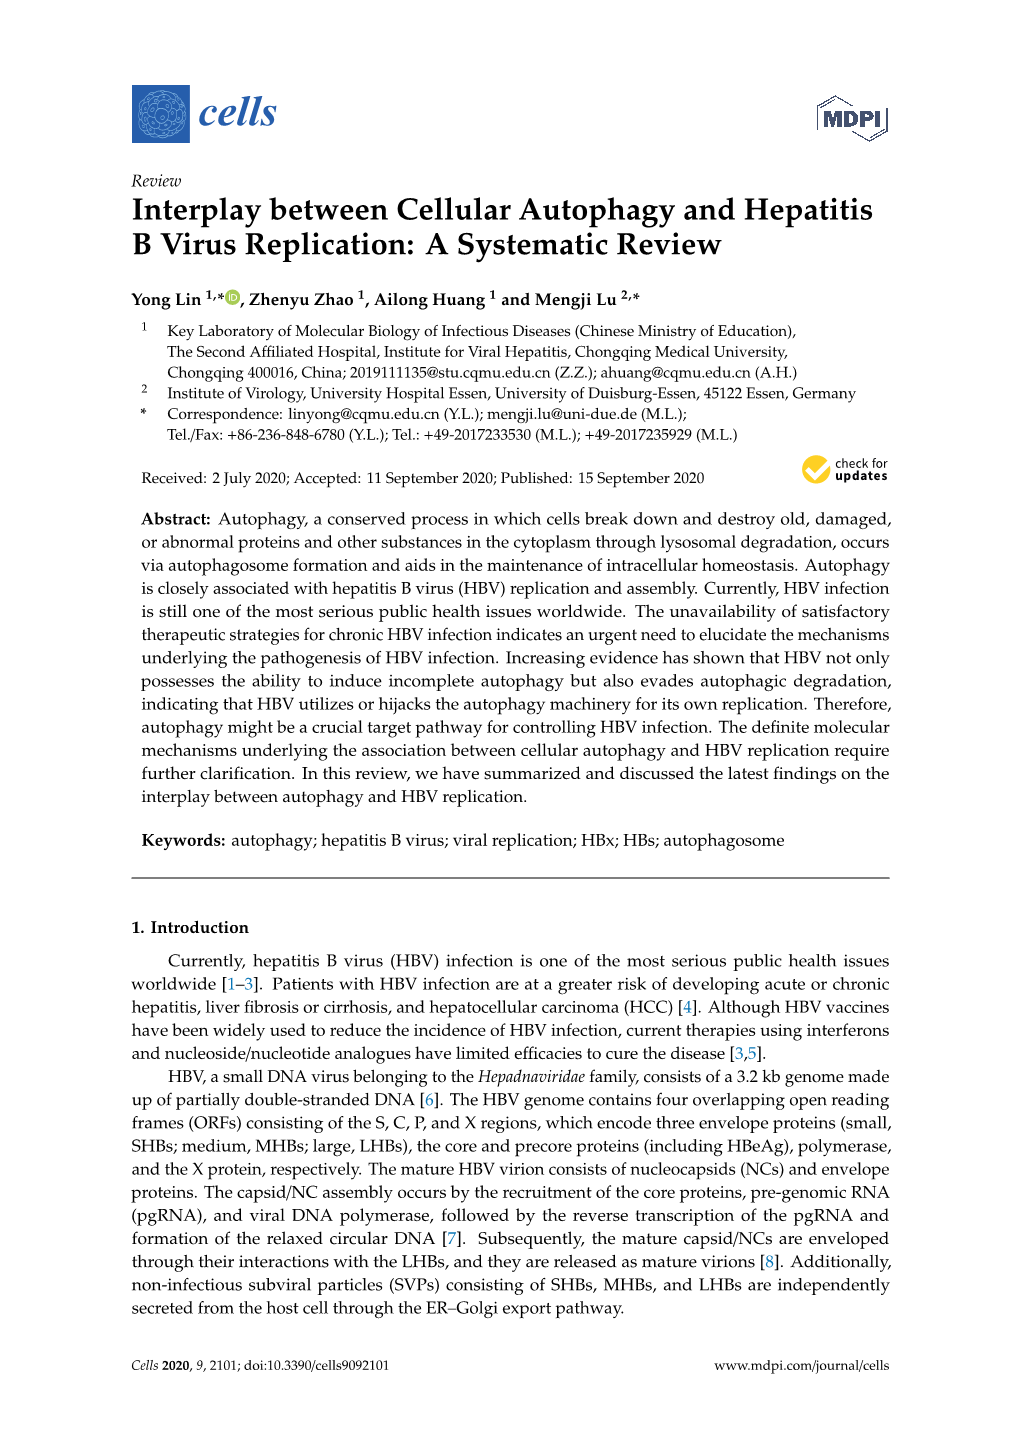 Interplay Between Cellular Autophagy and Hepatitis B Virus Replication: a Systematic Review